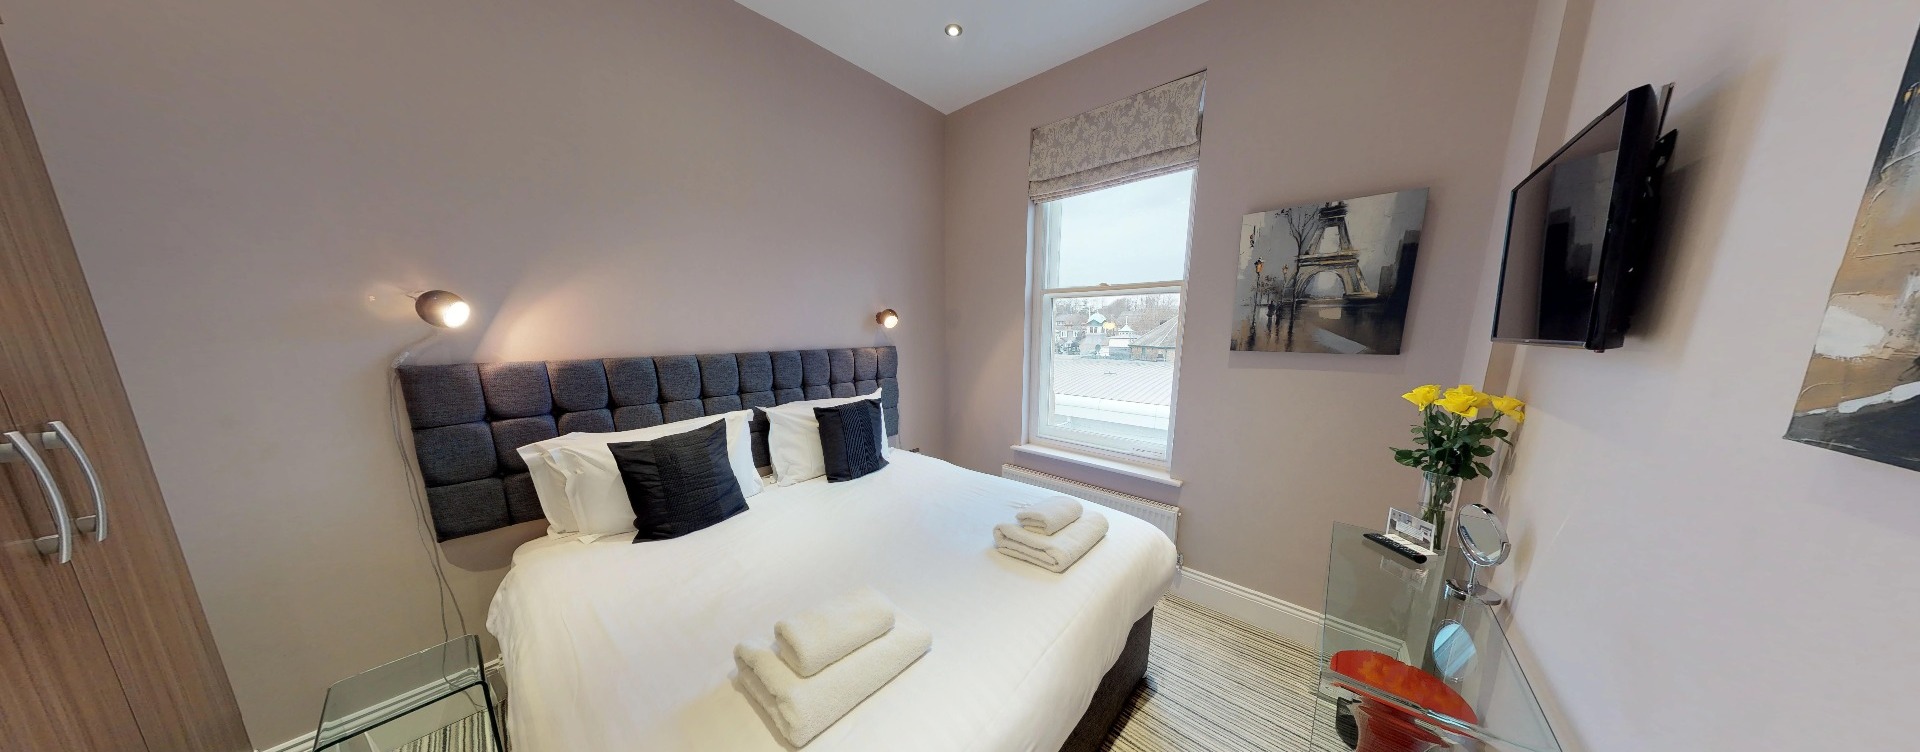 Cheap hotels in Harrogate or serviced apartments TO RENT